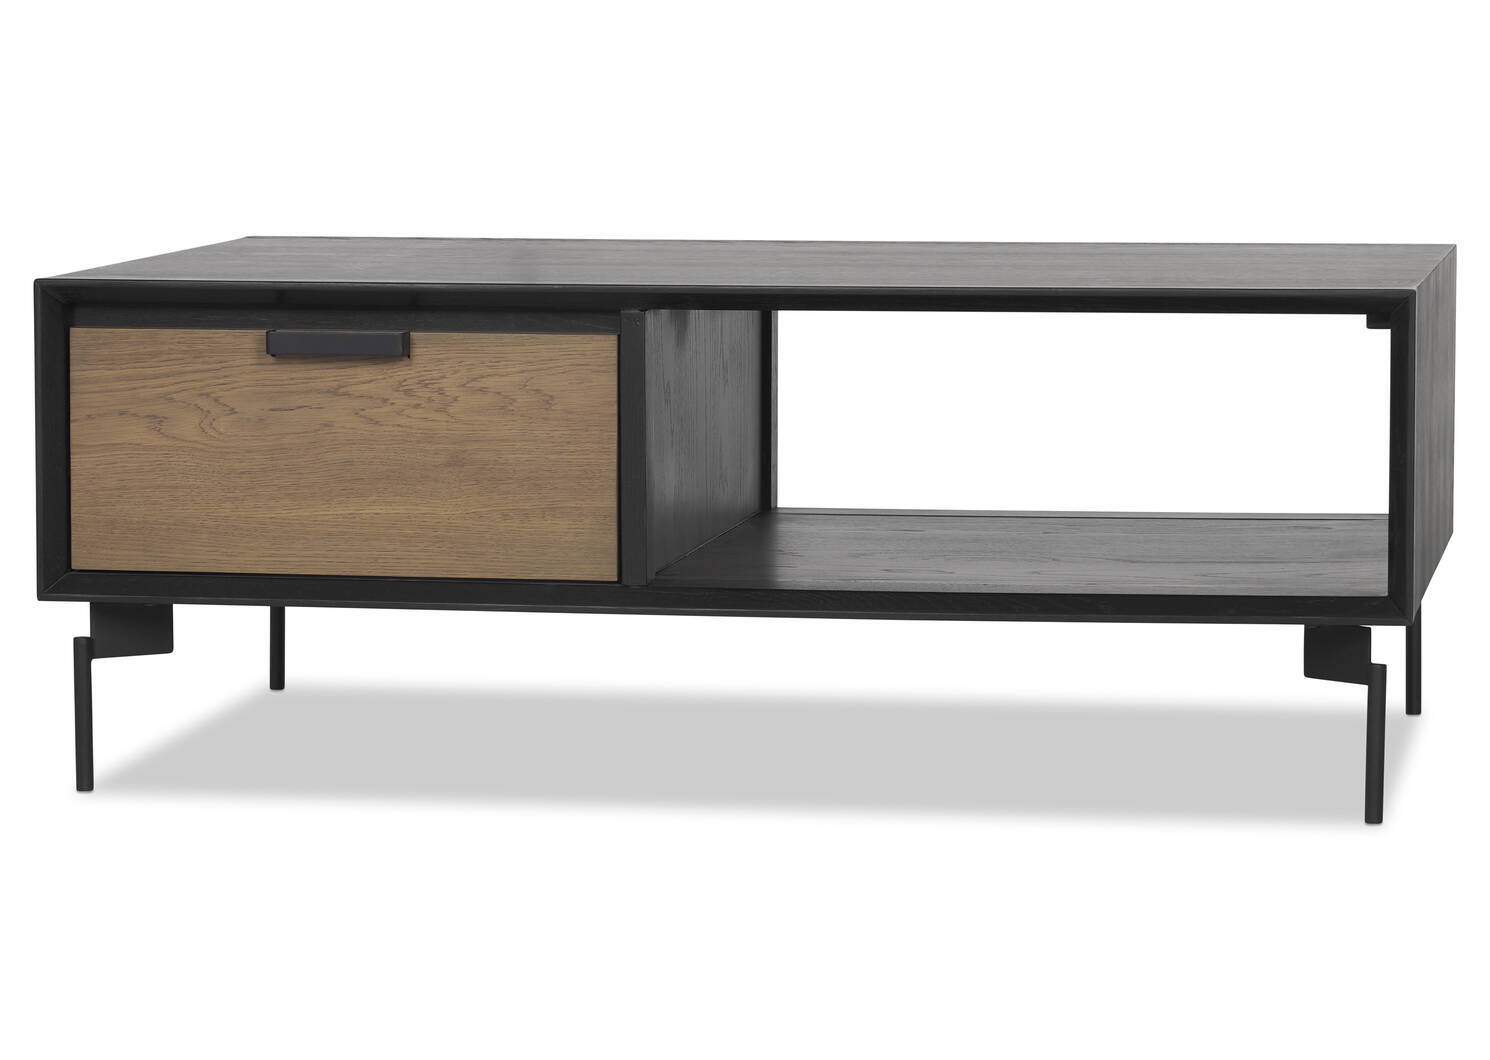 Melville Coffee Table -Raven Umber